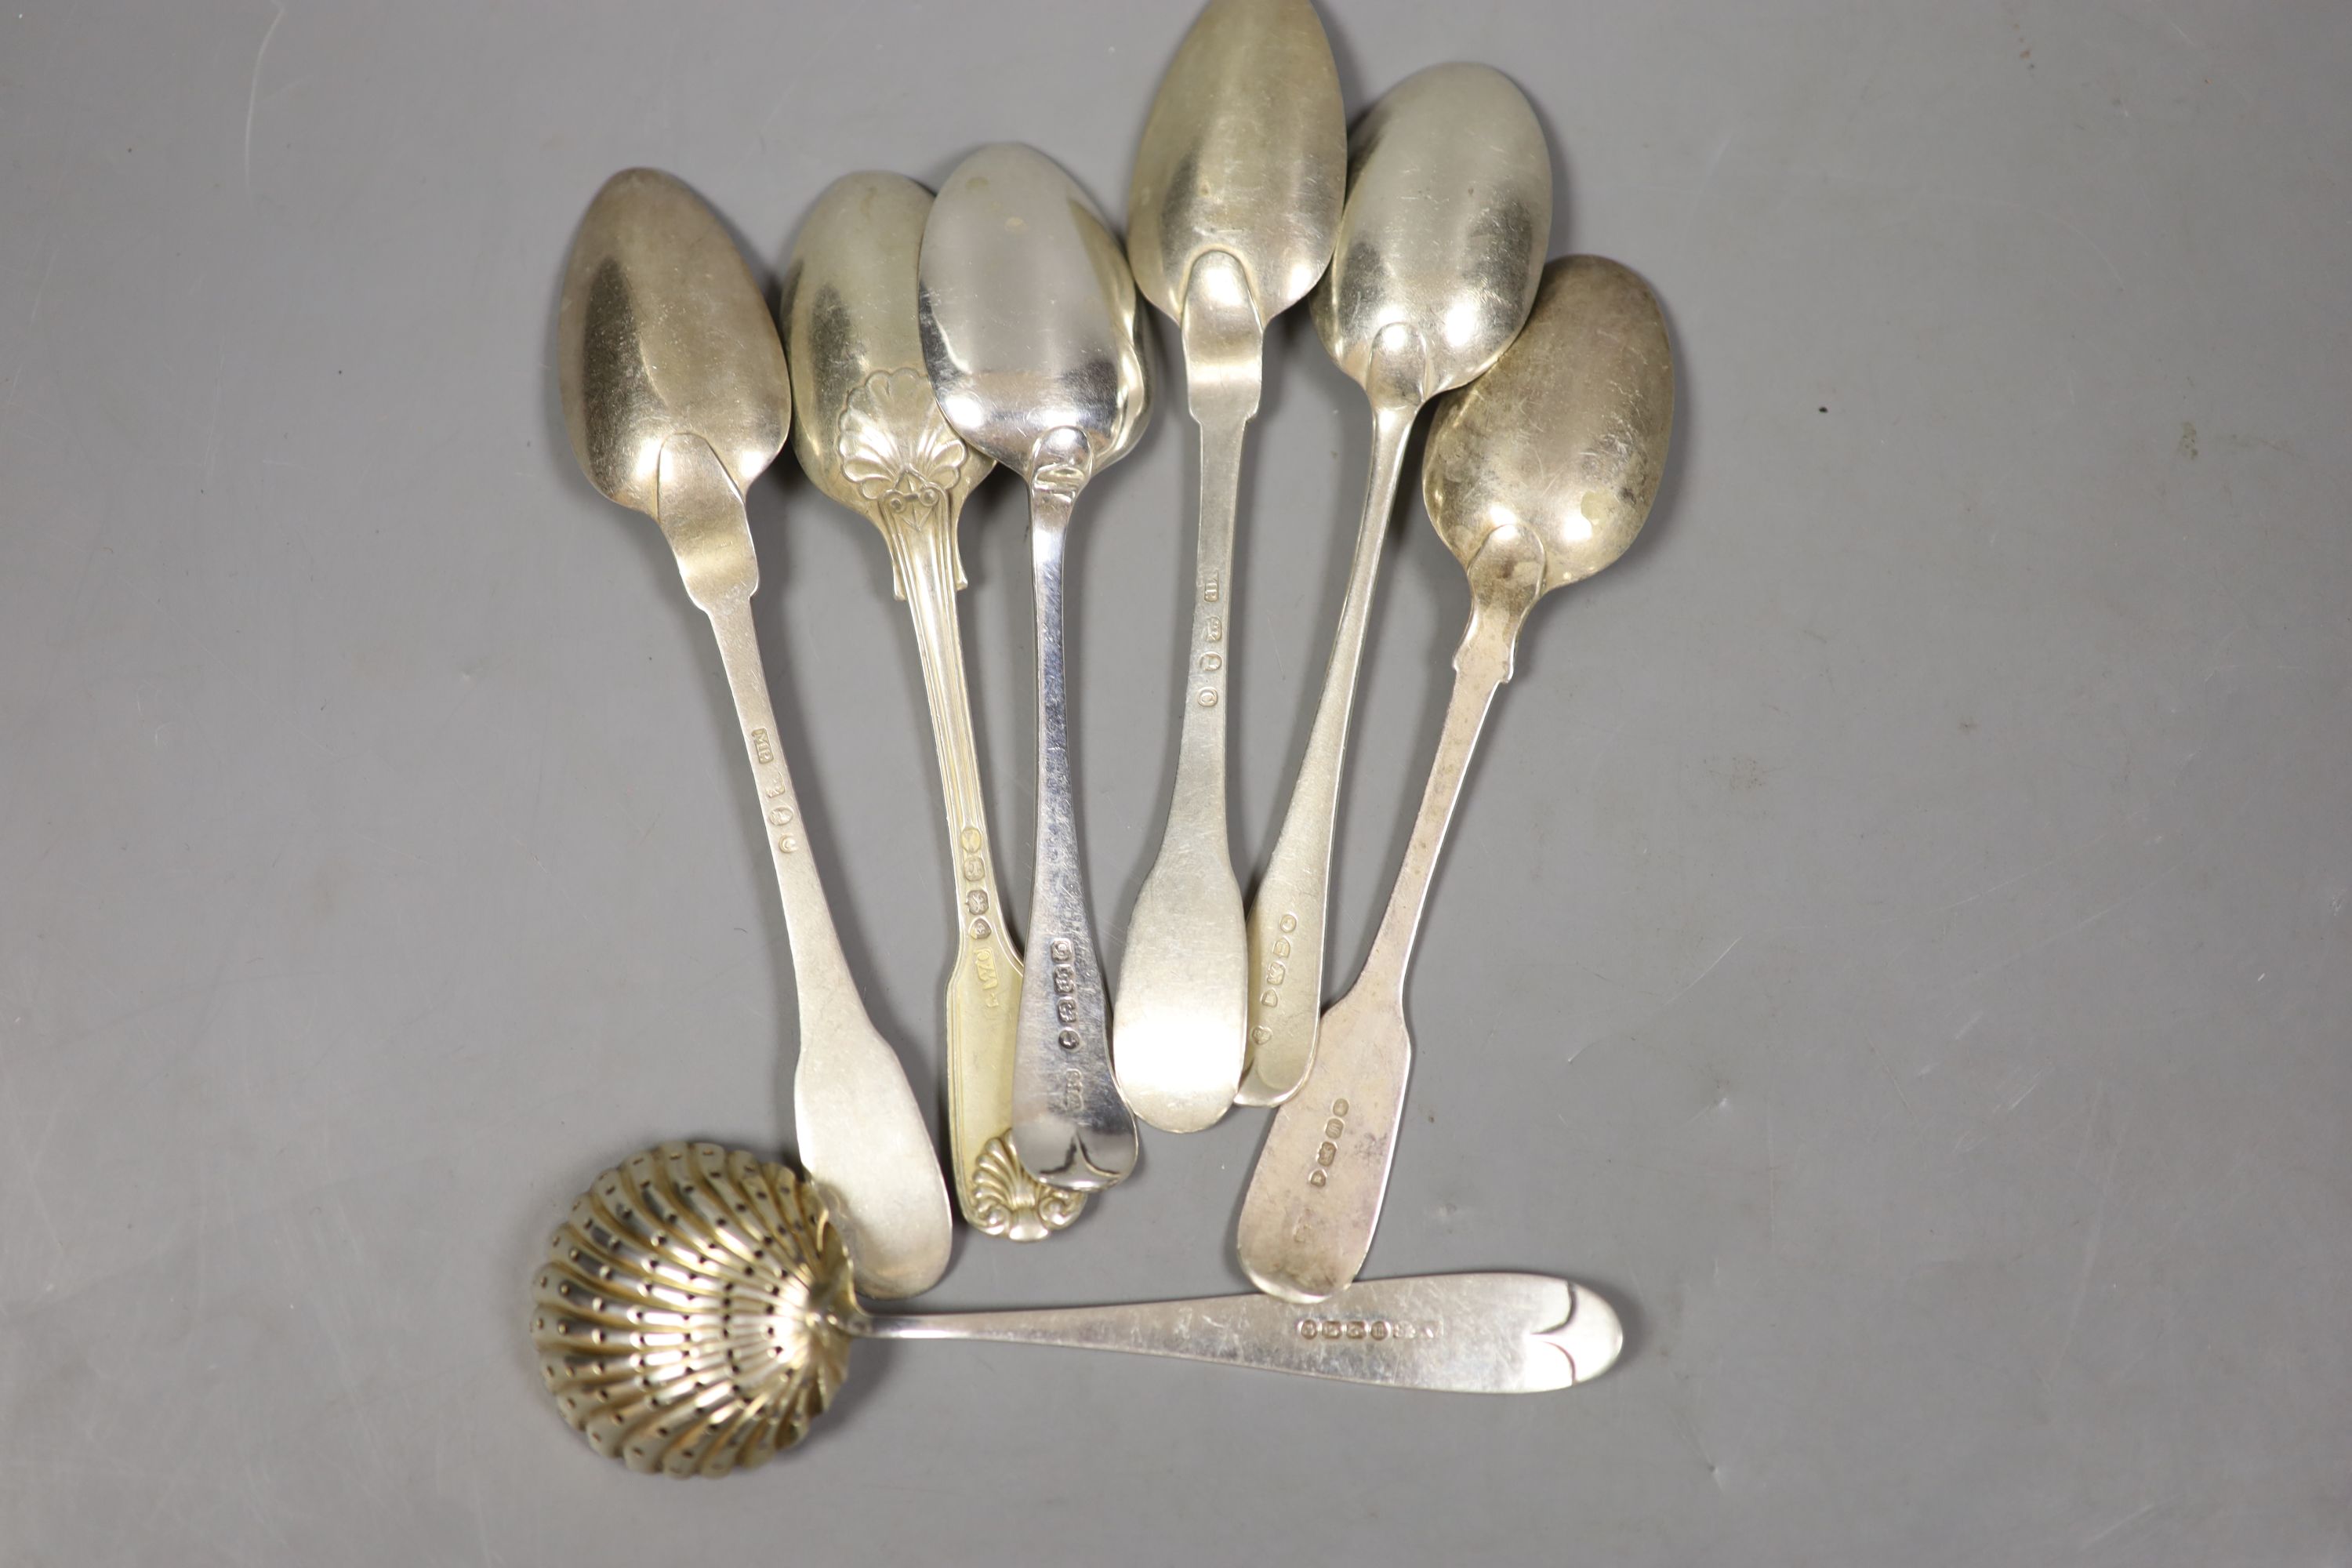 Seven assorted 19th century silver spoons including teaspoons and a sifter spoon, various dates and makers